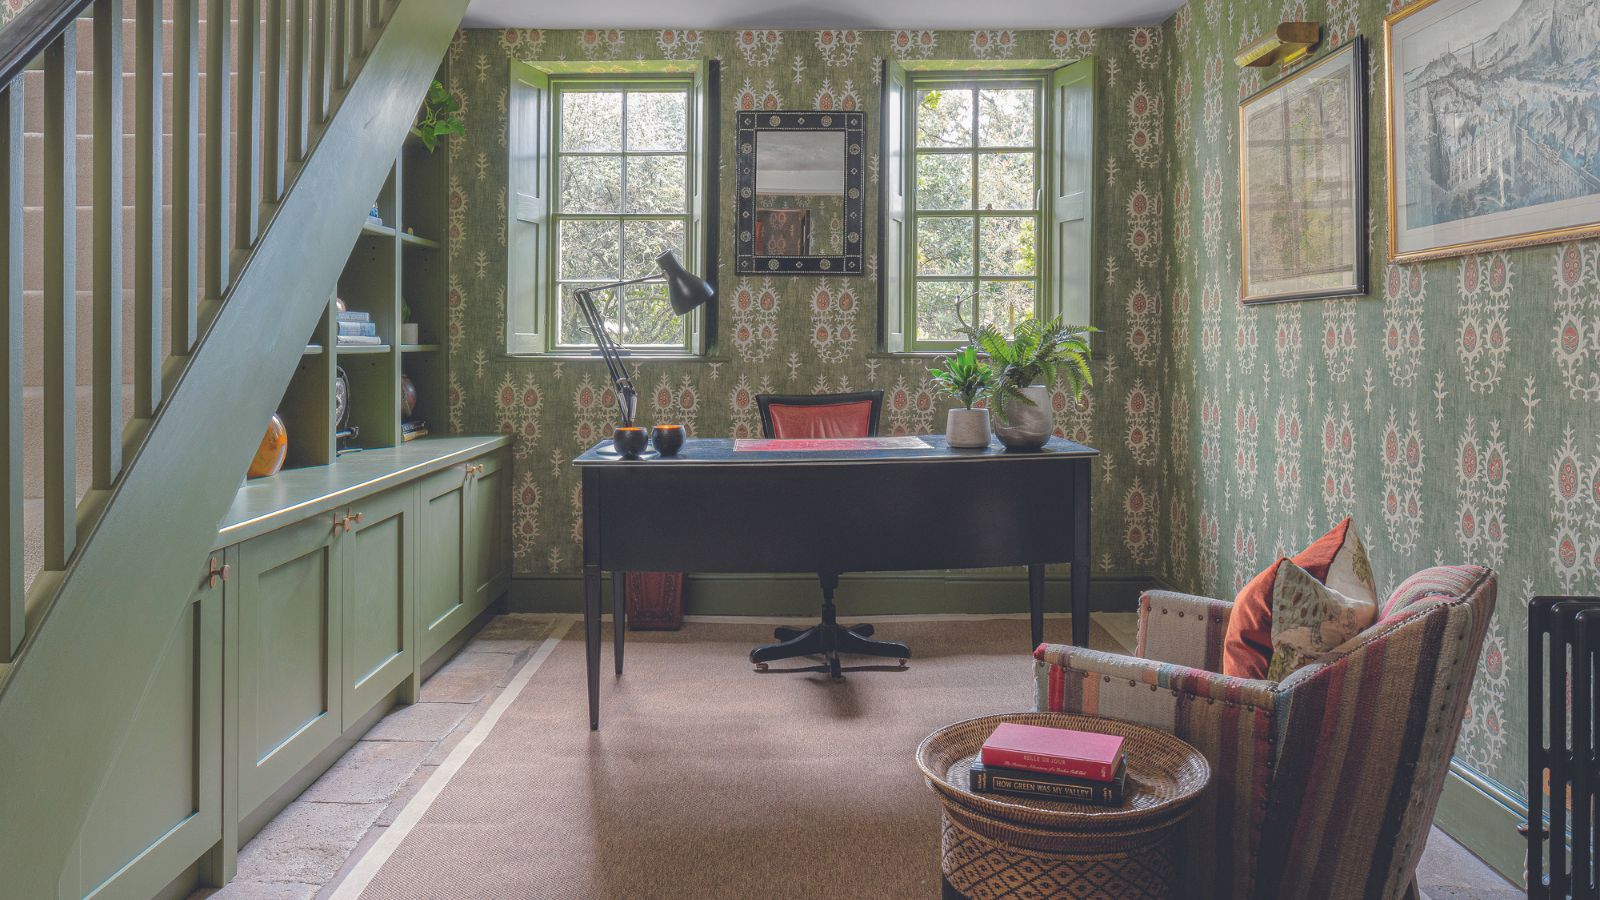 8 Expert Design Tips for Your Luxury Home Office - The Cliffs